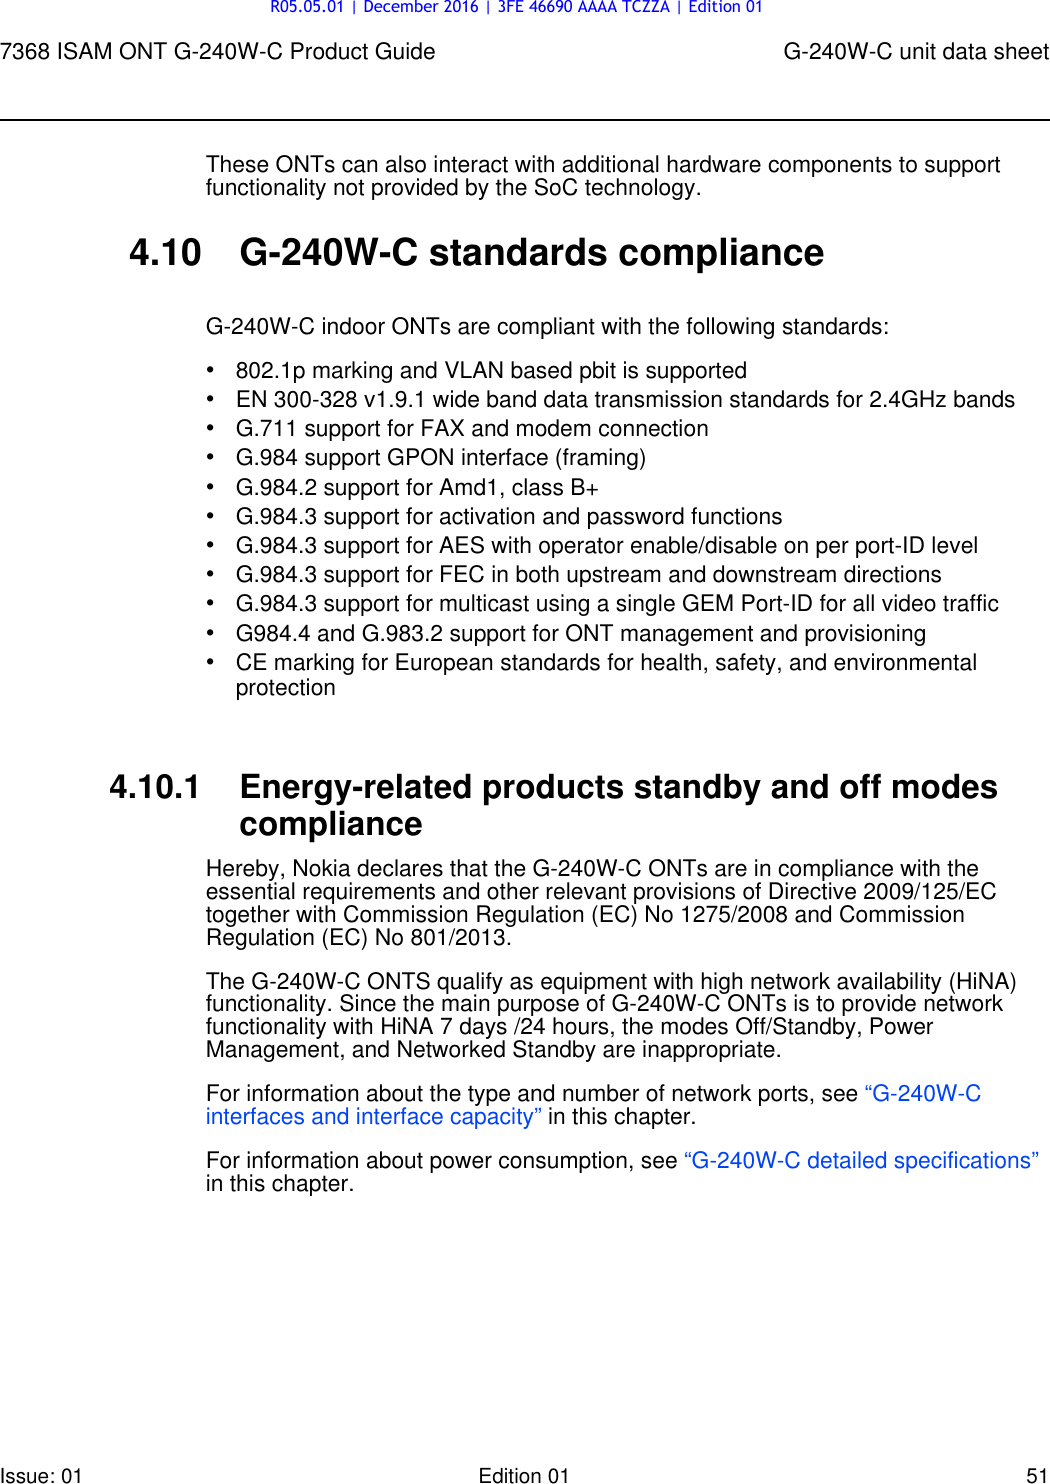 Page 51 of Nokia Bell G240W-C GPON ONU User Manual 7368 ISAM ONT G 240W B Product Guide